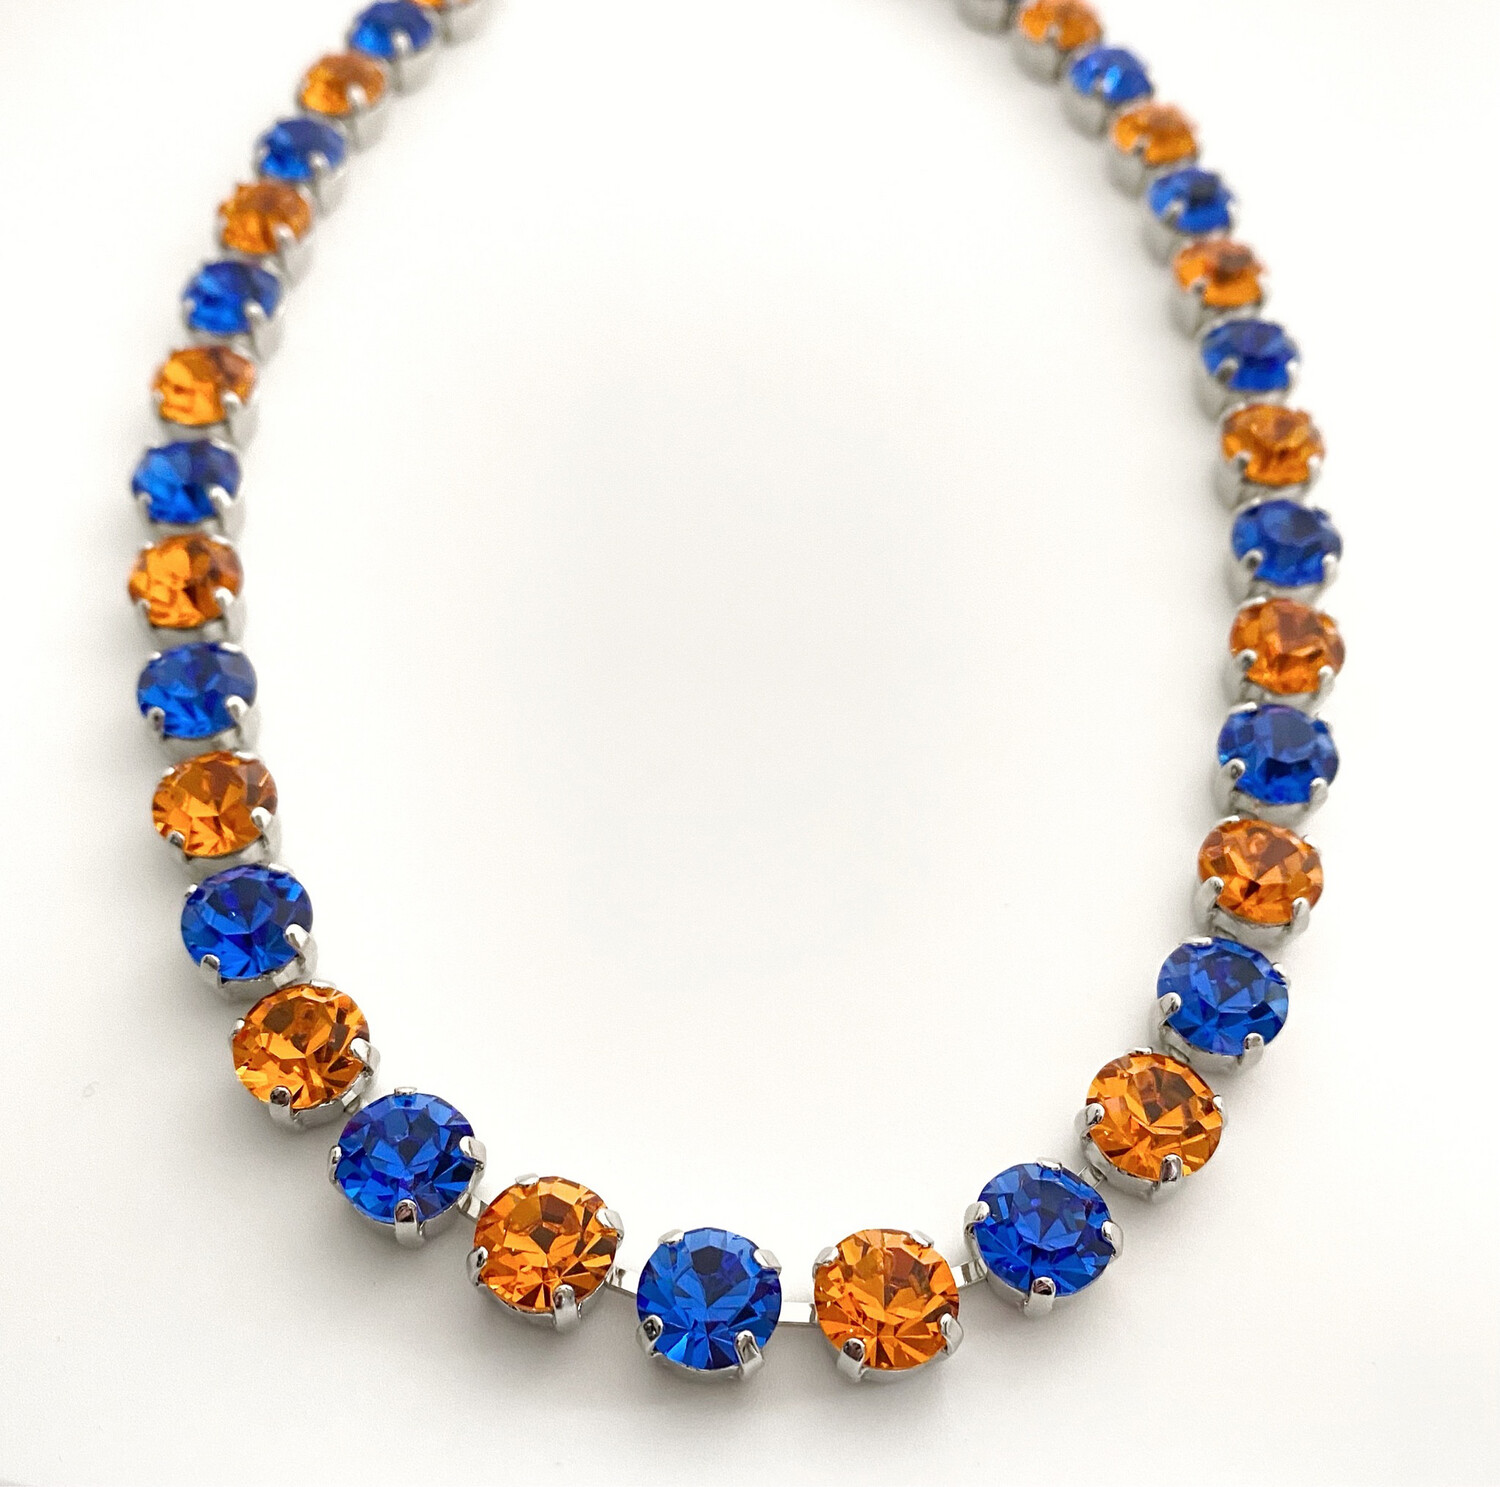 Florida Gator inspired Crystal Necklace and Earrings